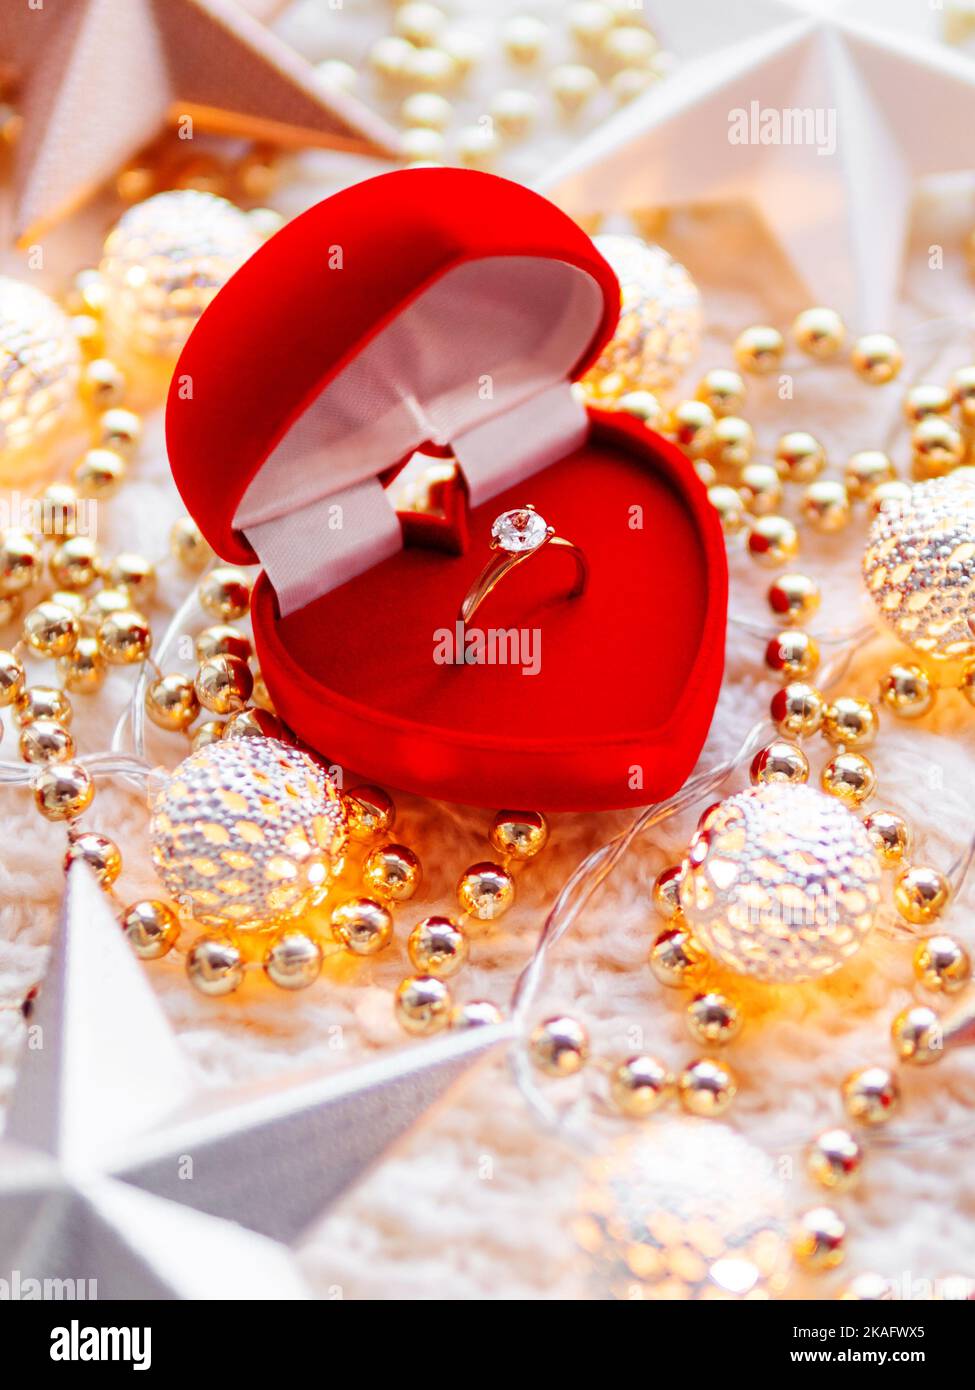 Christmas and New Year star decorations on white knitted background. Red heart gift box with engagement golden ring, metal light bulbs Stock Photo